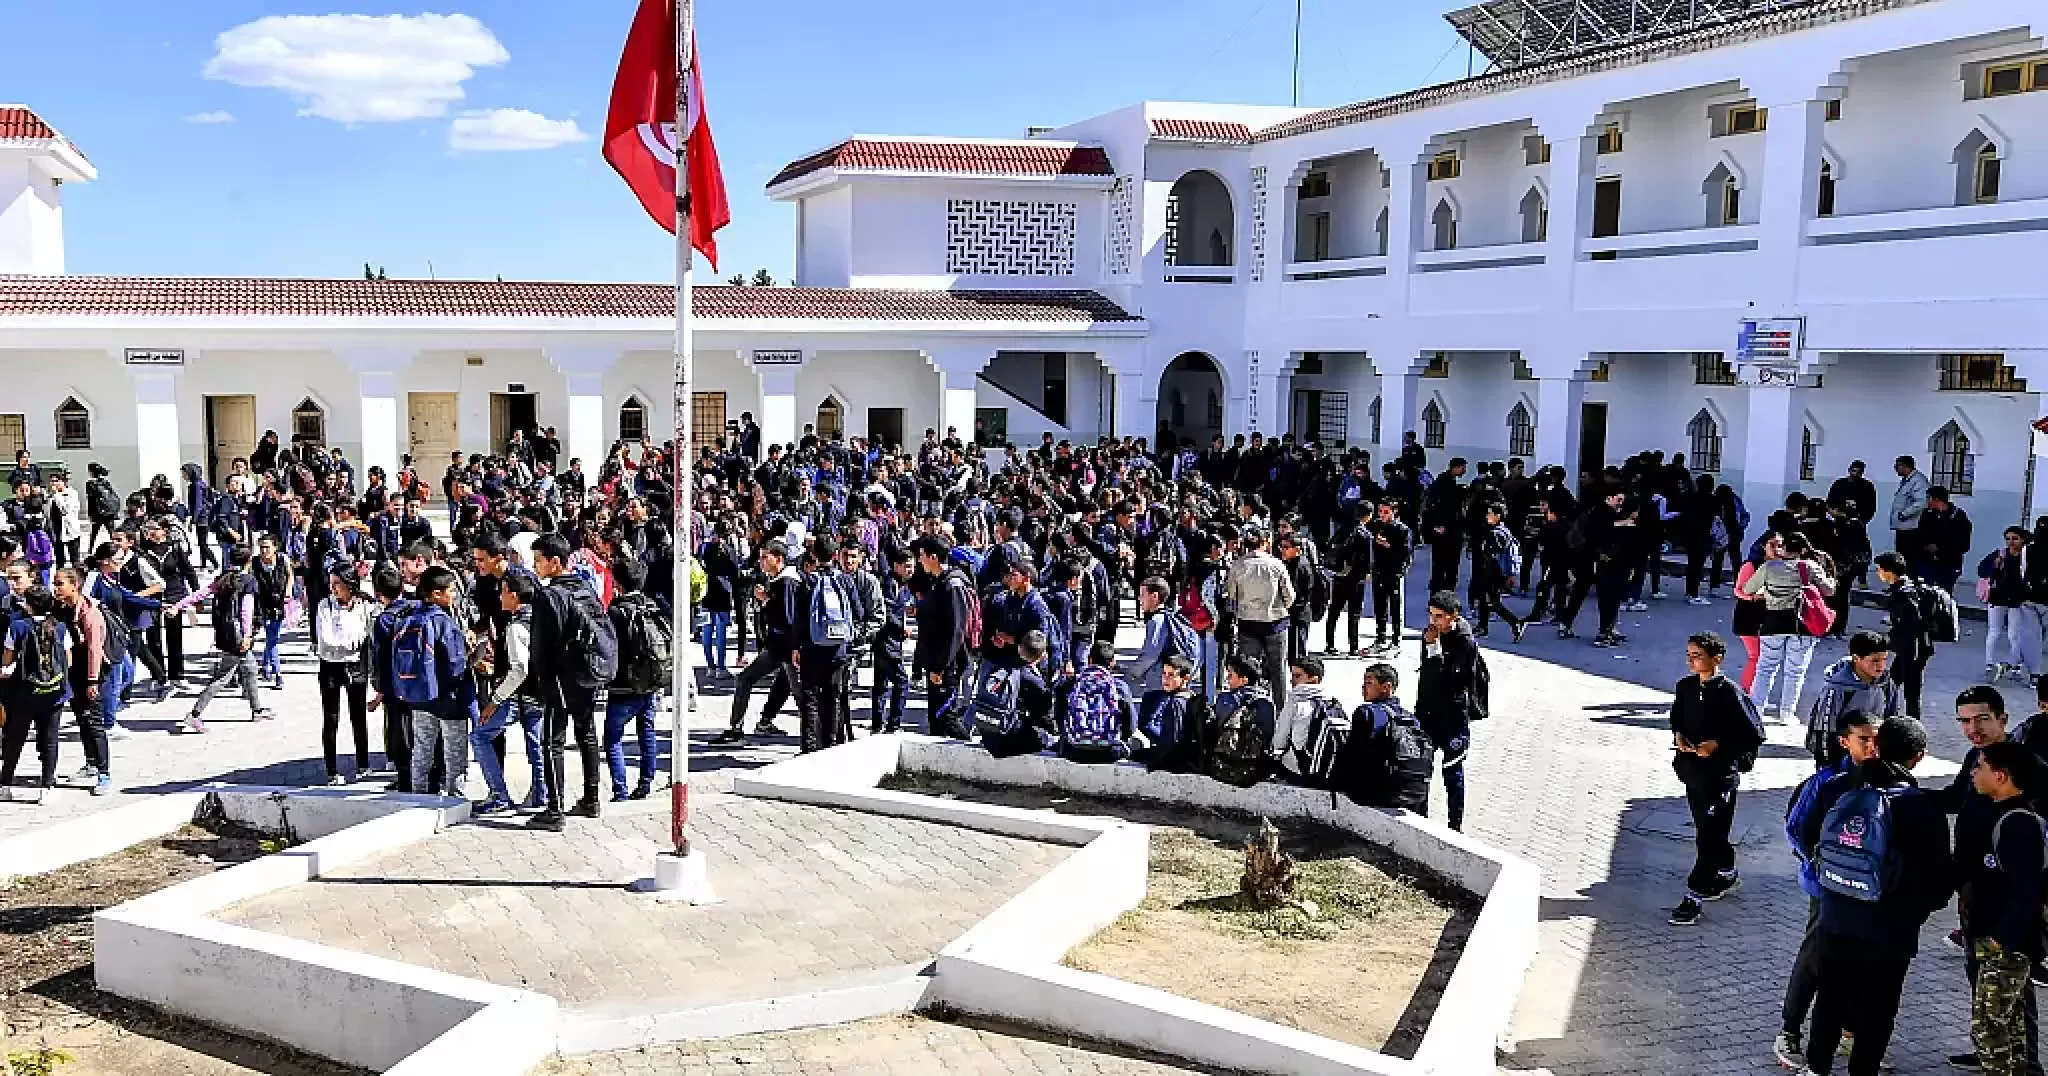 Reviving Tunisia’s school system one farm at a time